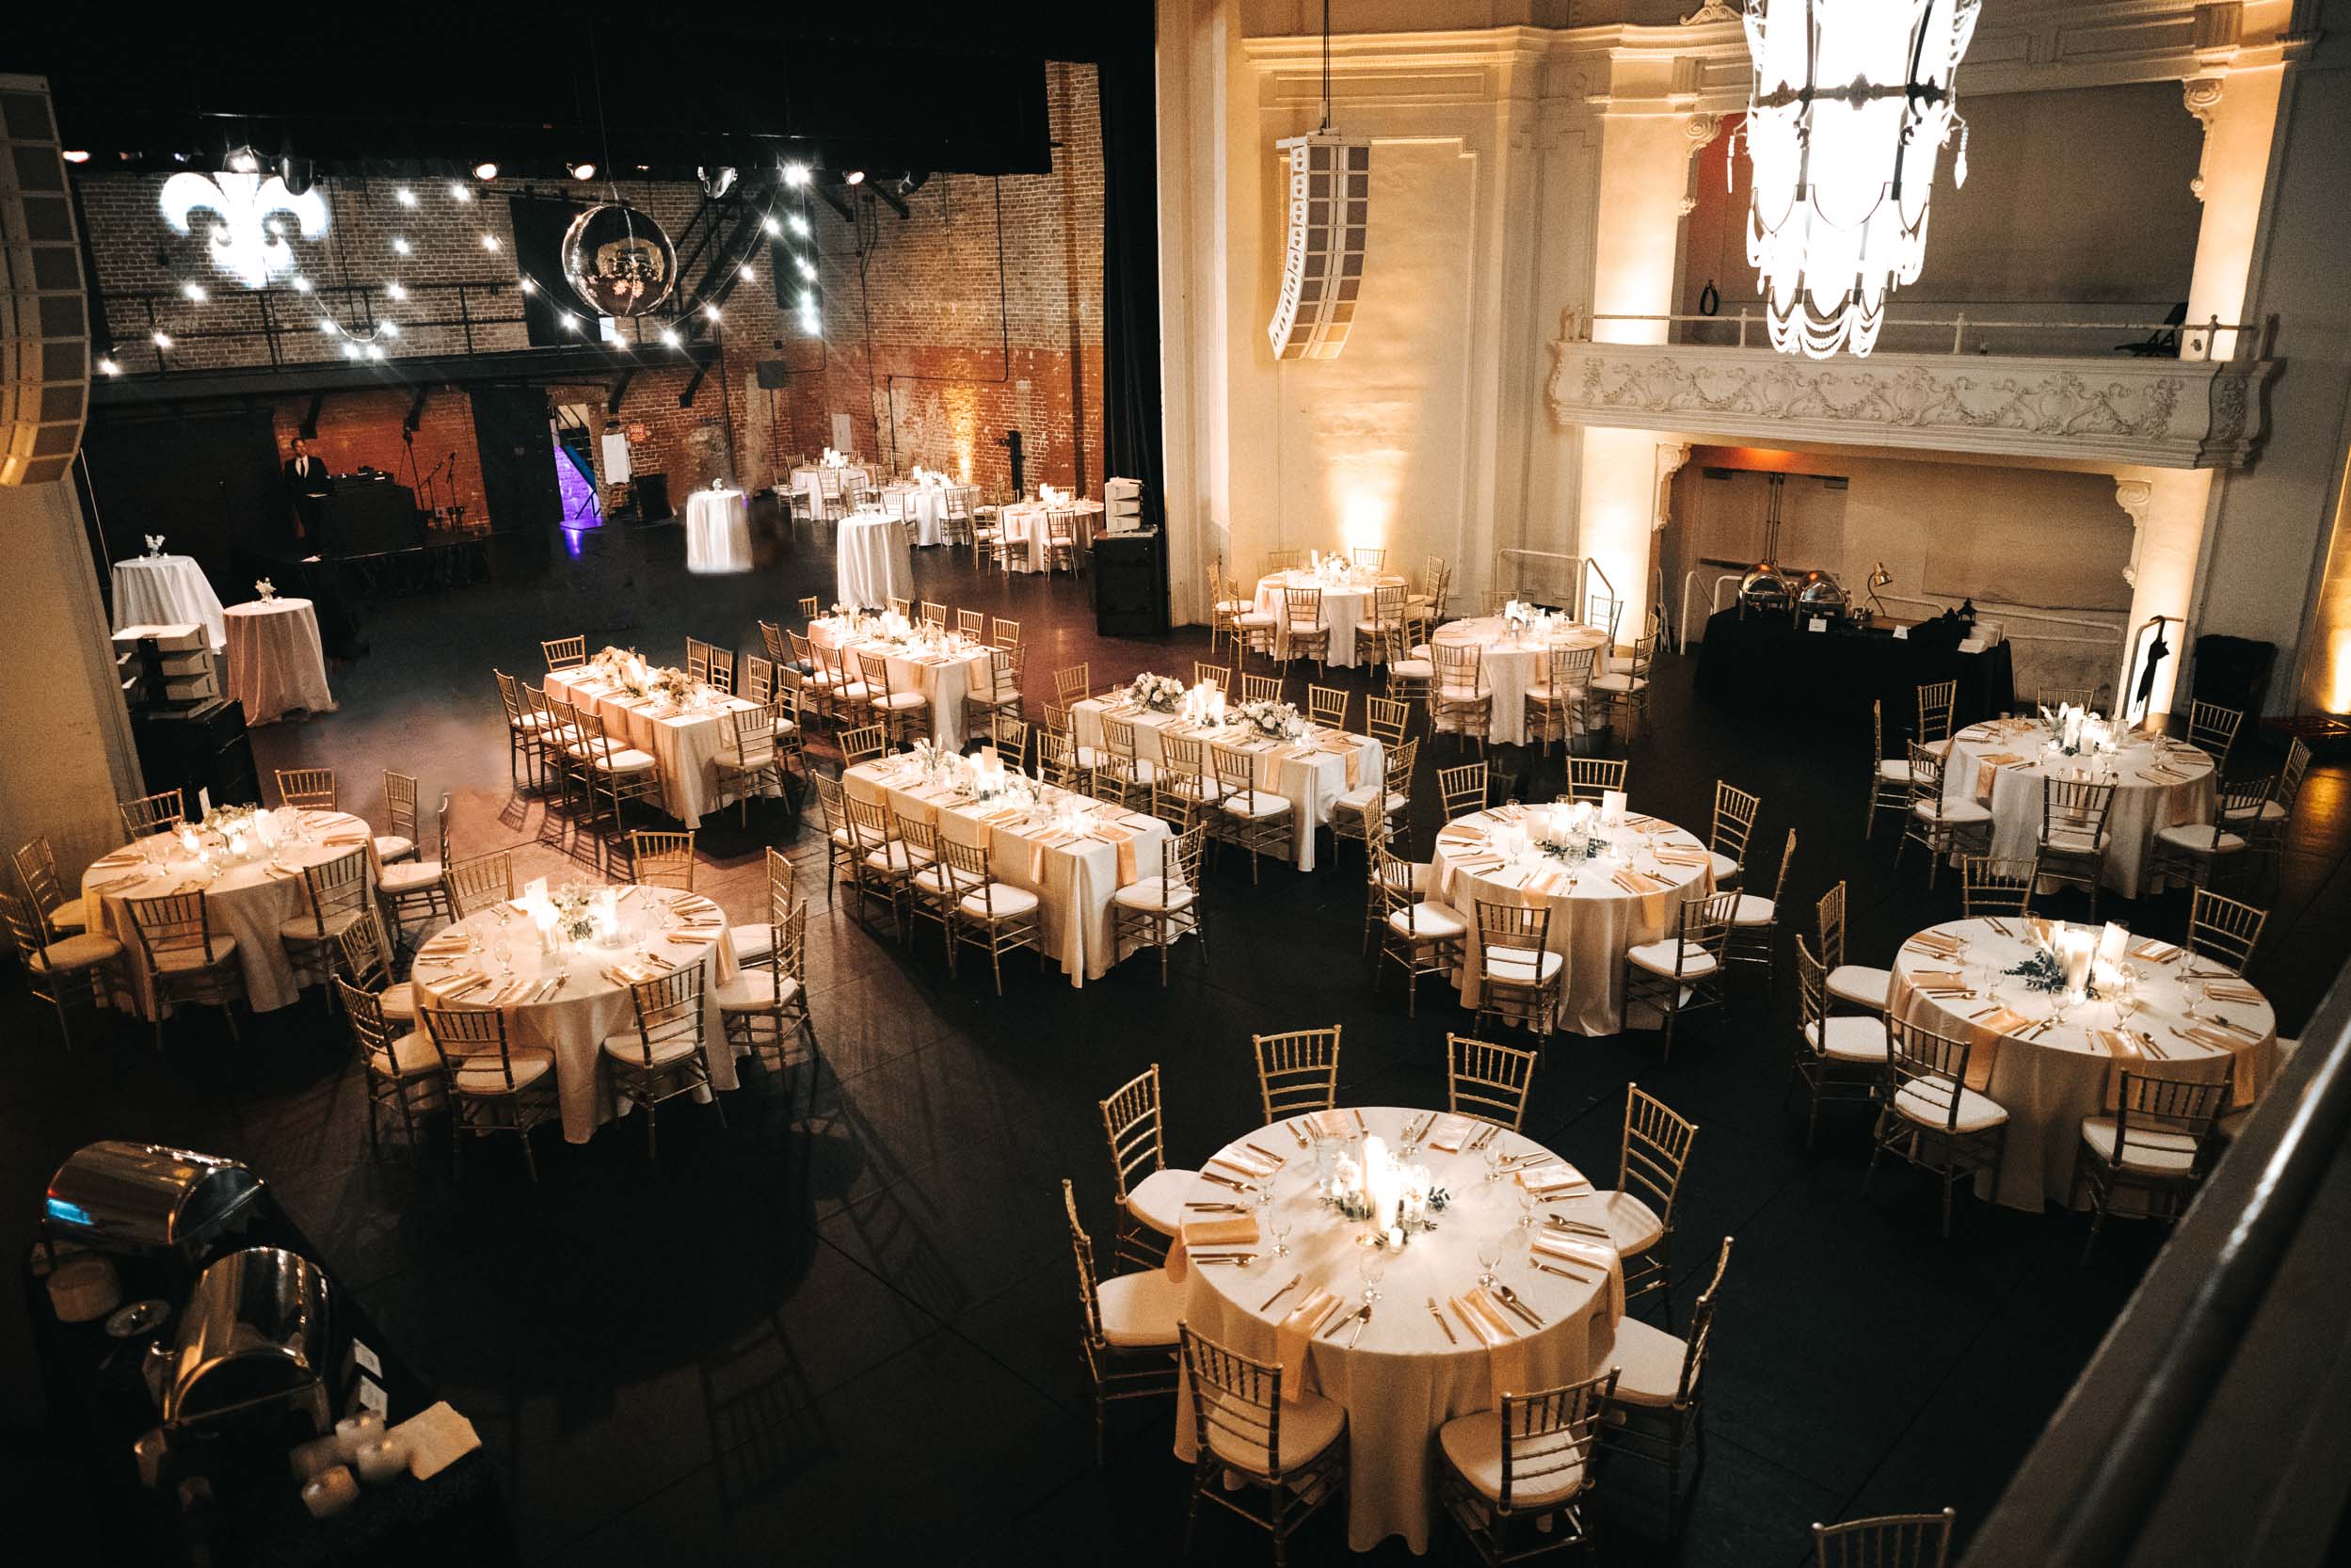 tables and decor of wedding reception at Civic Theater in New Orleans